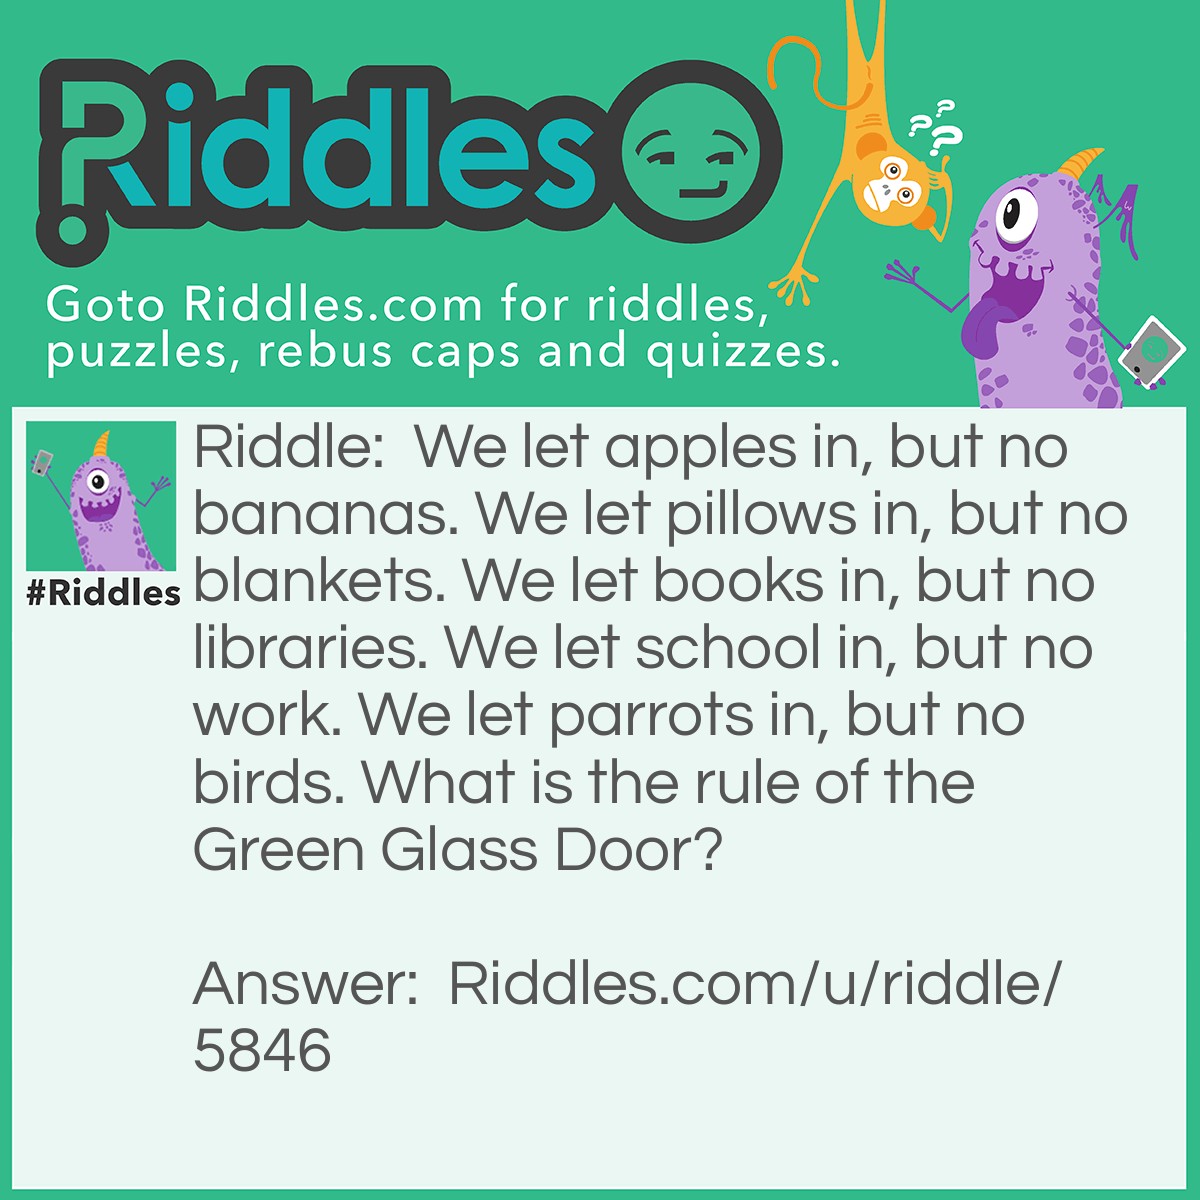 Riddle: We let apples in, but no bananas. We let pillows in, but no blankets. We let books in, but no libraries. We let school in, but no work. We let parrots in, but no birds. What is the rule of the Green Glass Door? Answer: Double letters.